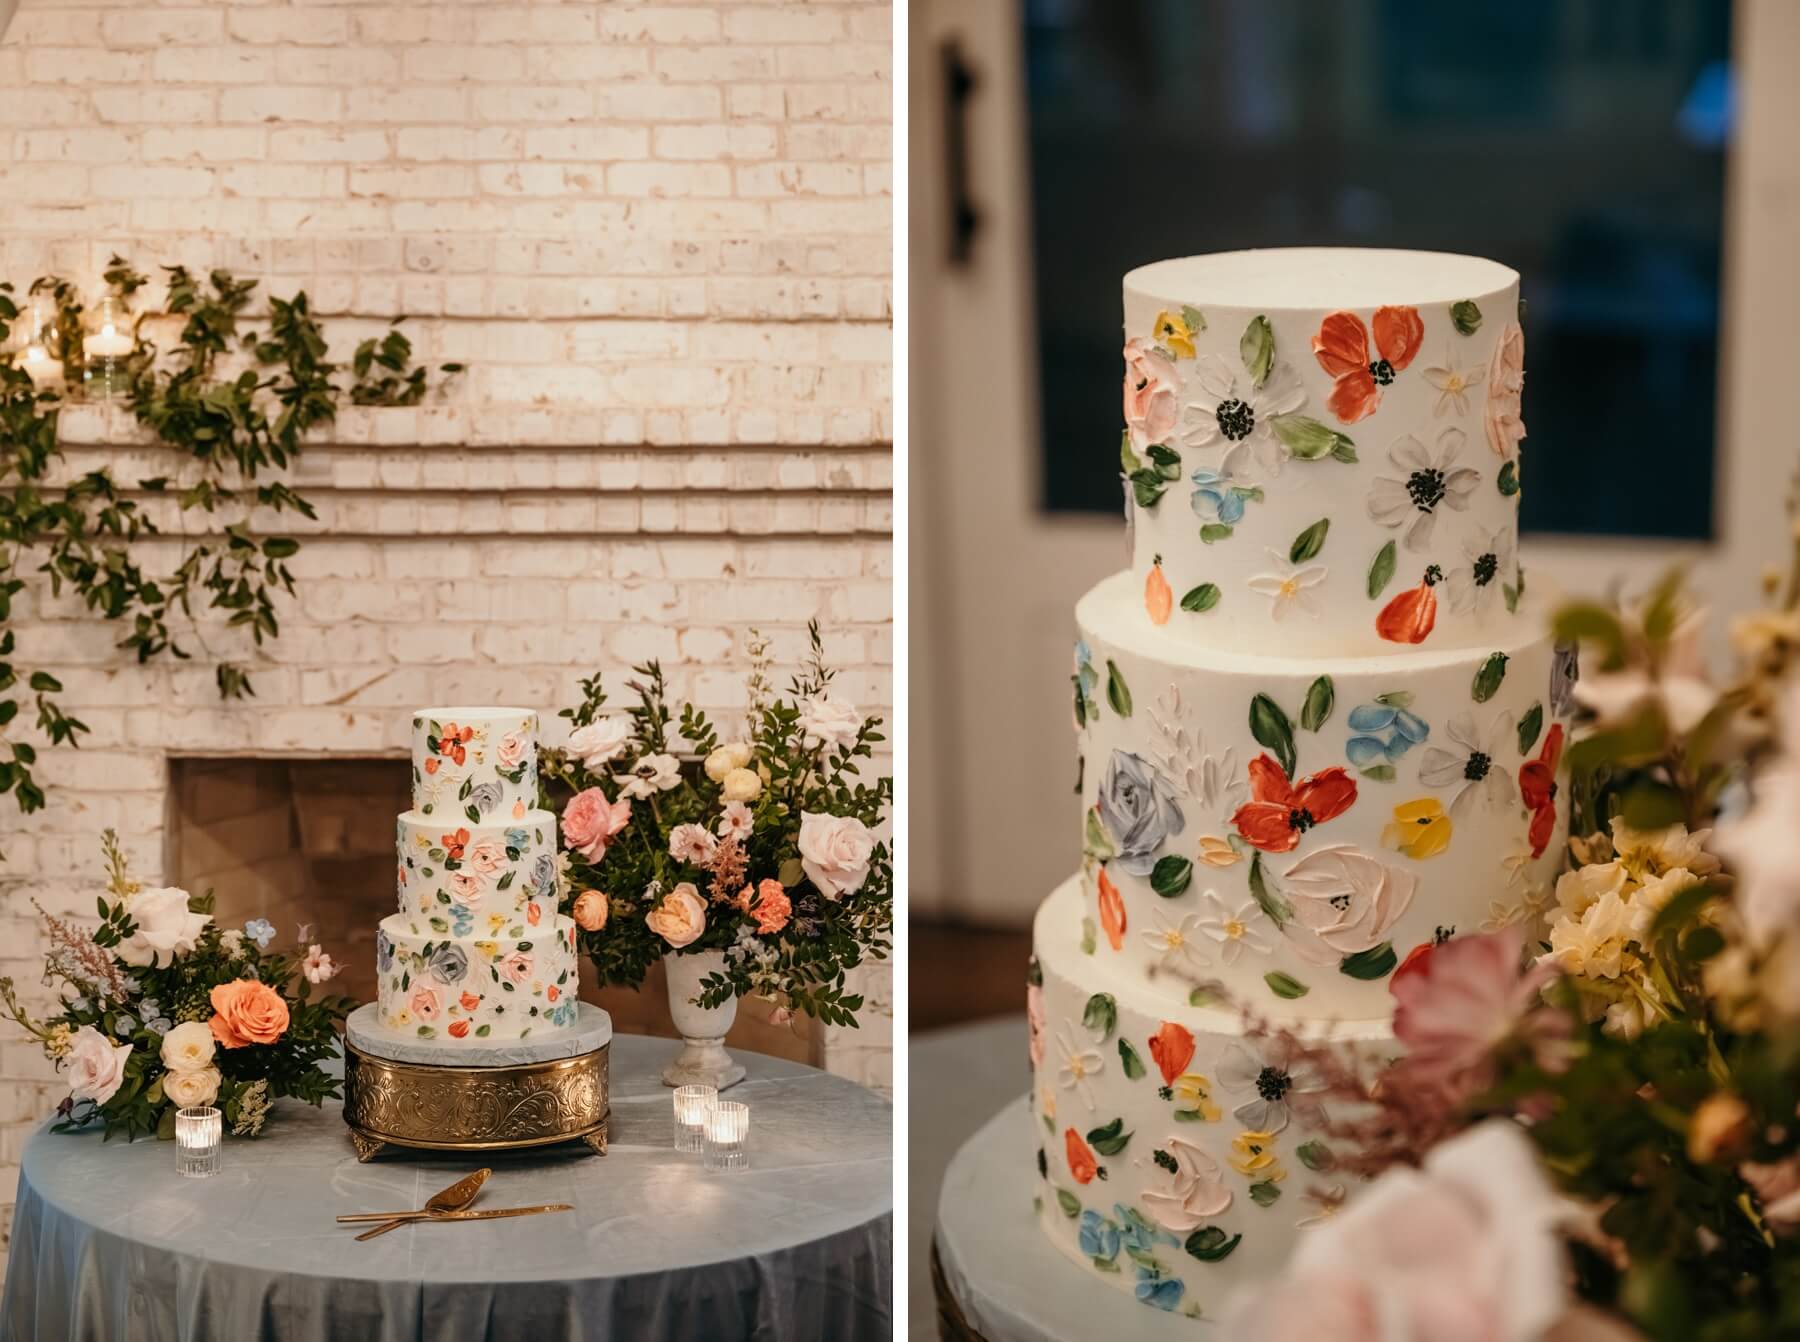 Three tier wedding cake with handprinted abstract flowers